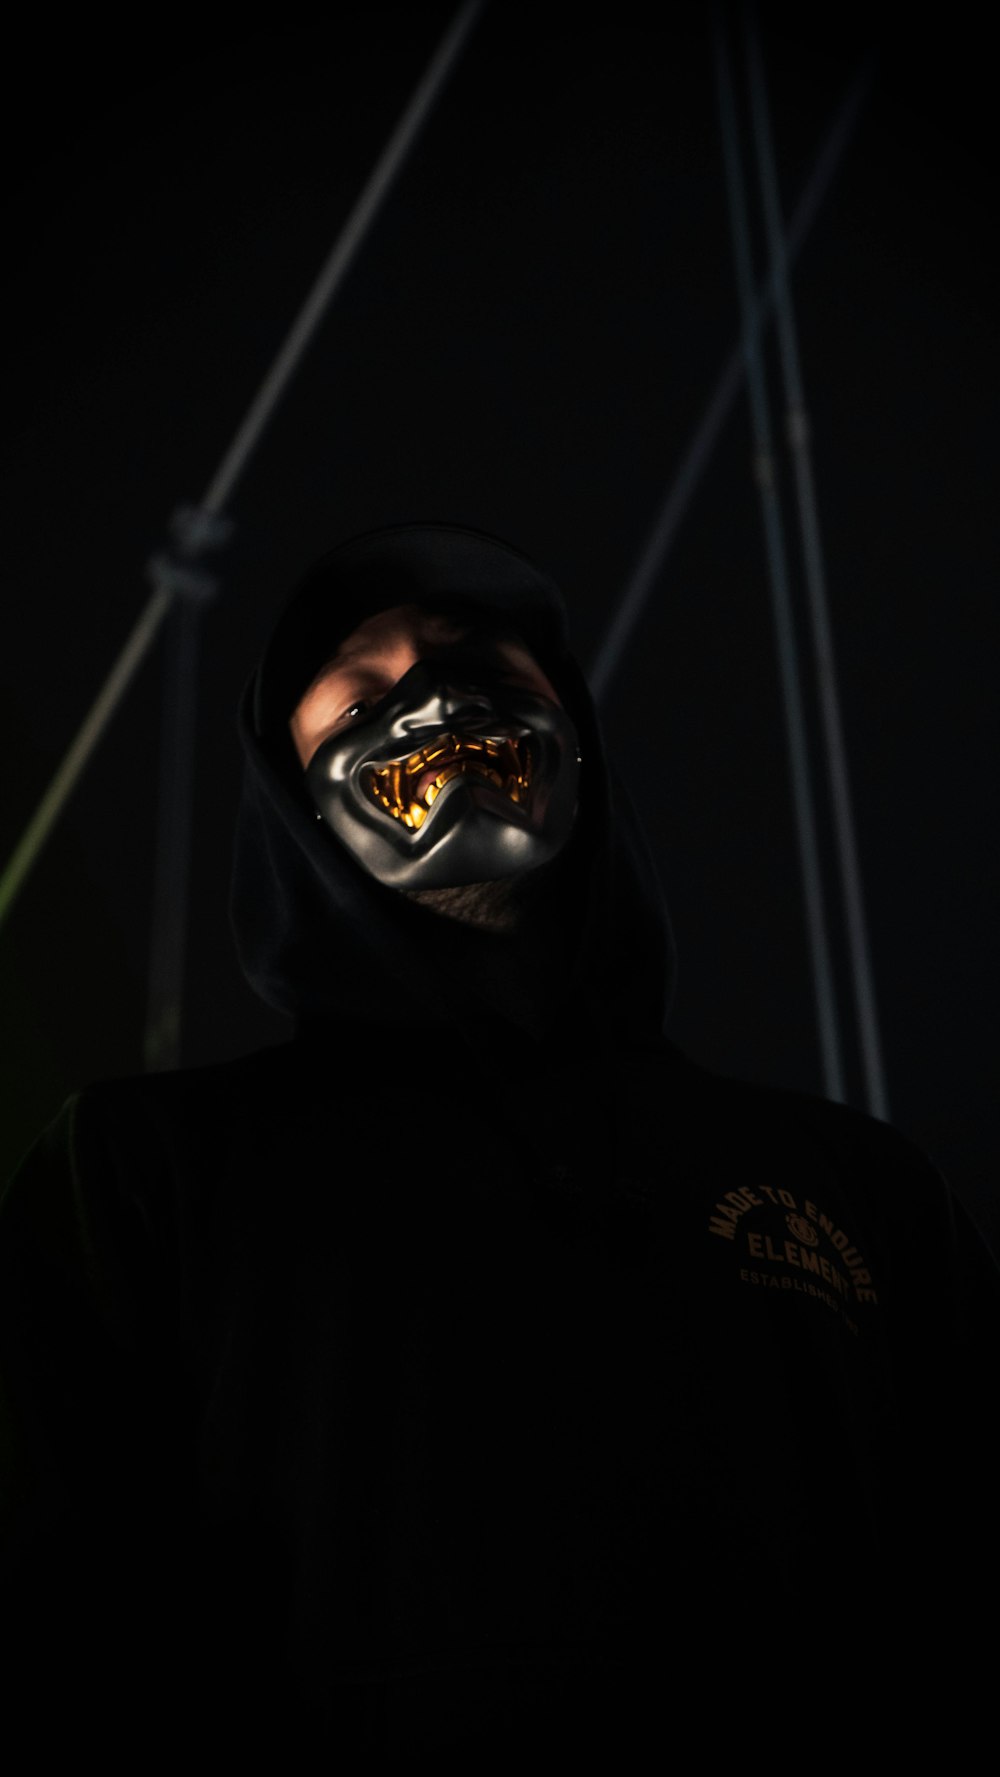 a person wearing a mask